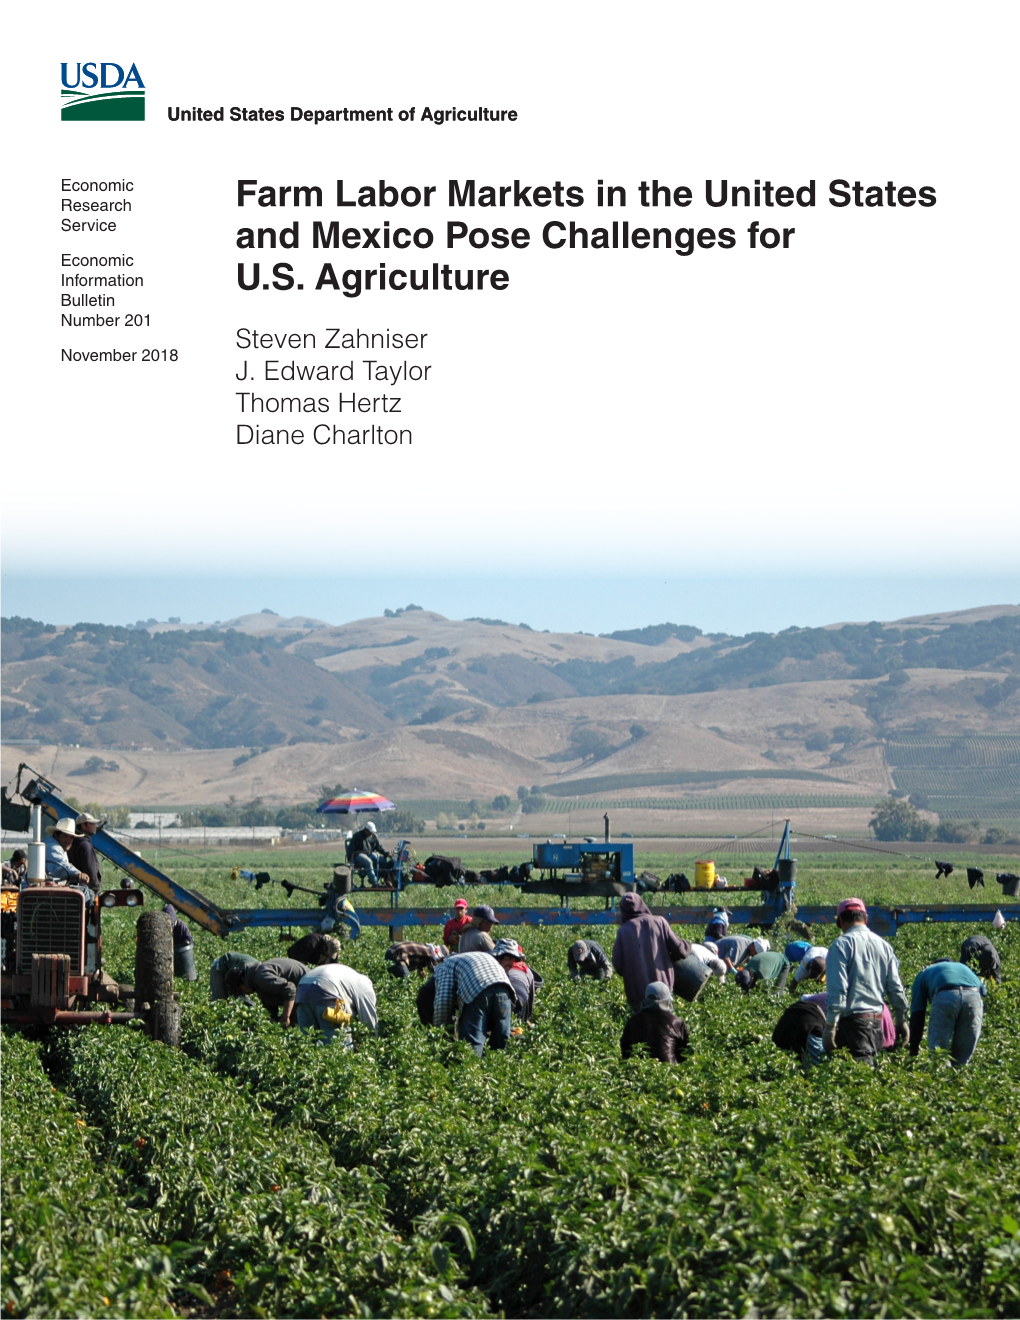 Farm Labor Markets in the United States and Mexico Pose Challenges for U.S